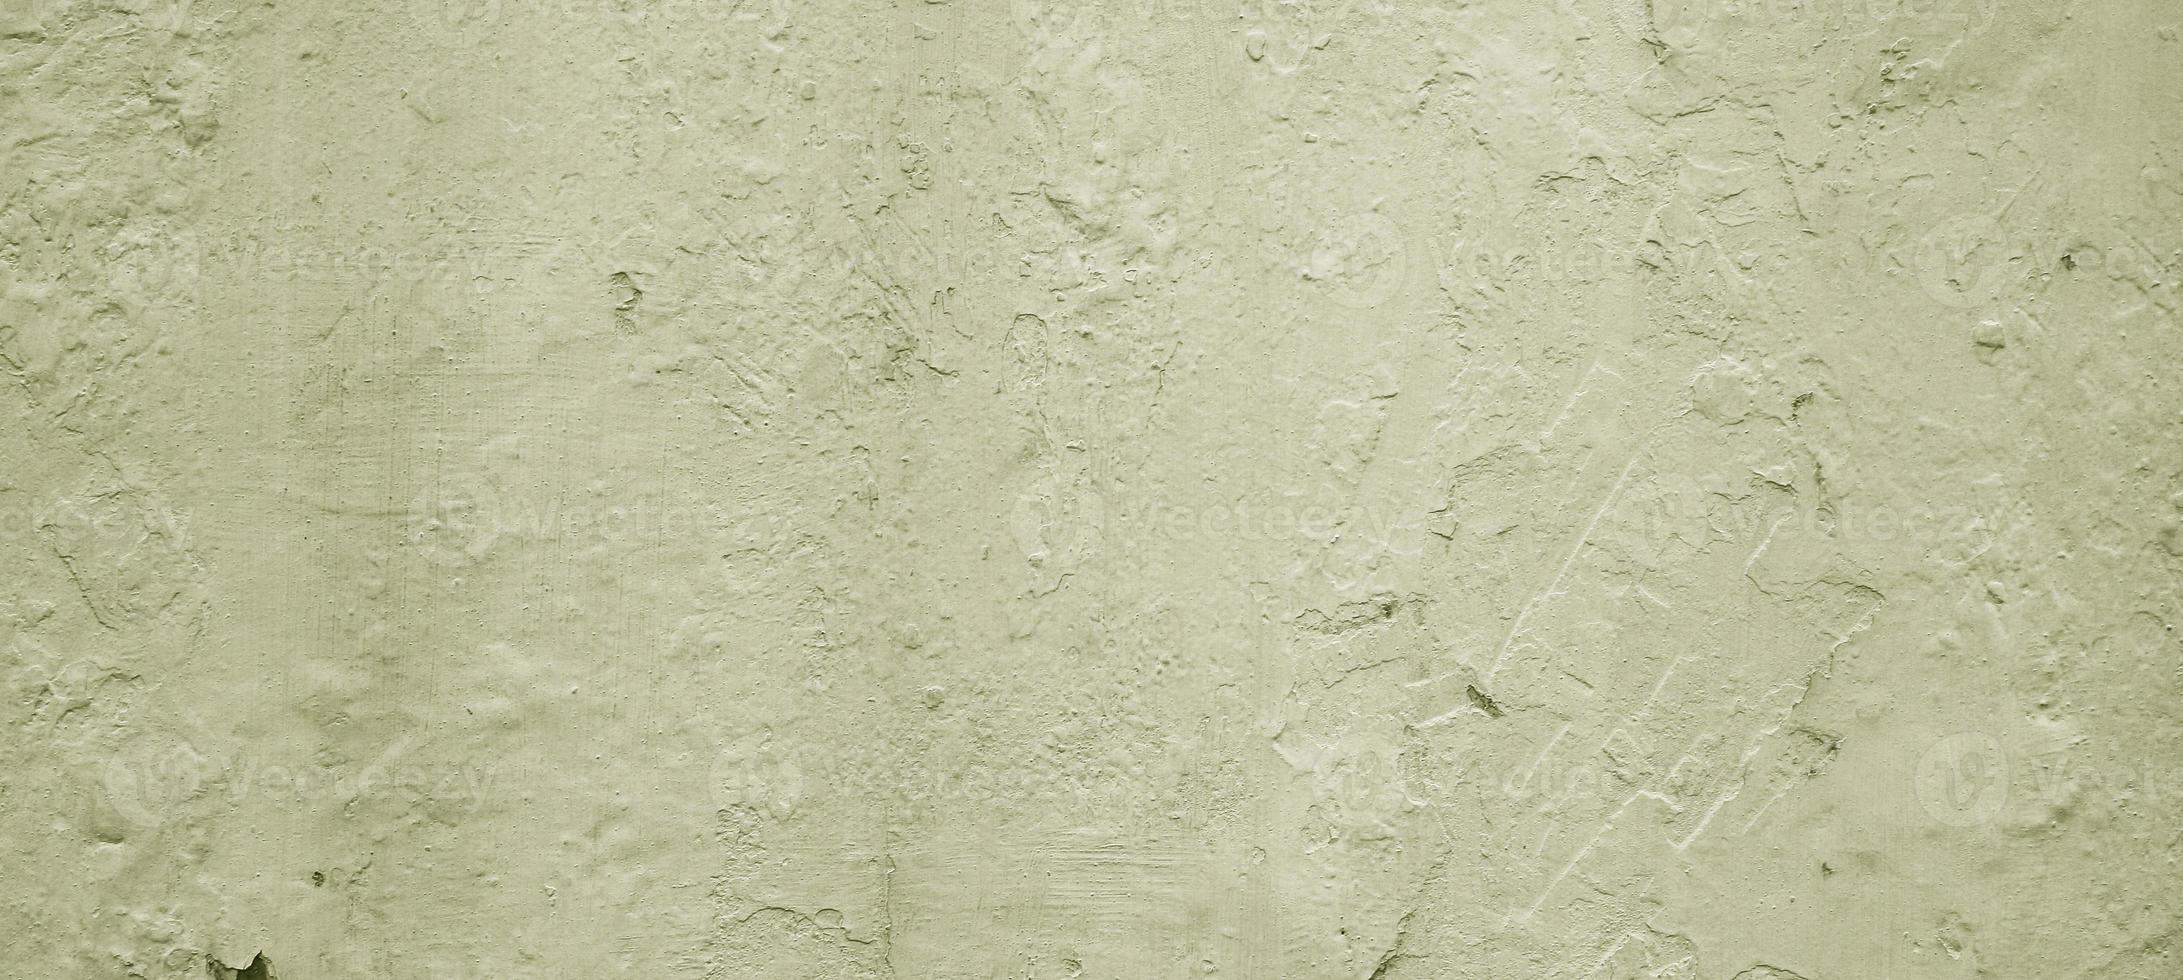 Grunge cement wallpaper., Stucco wall background, Anthracite stone concrete texture, Concrete wall as background. photo